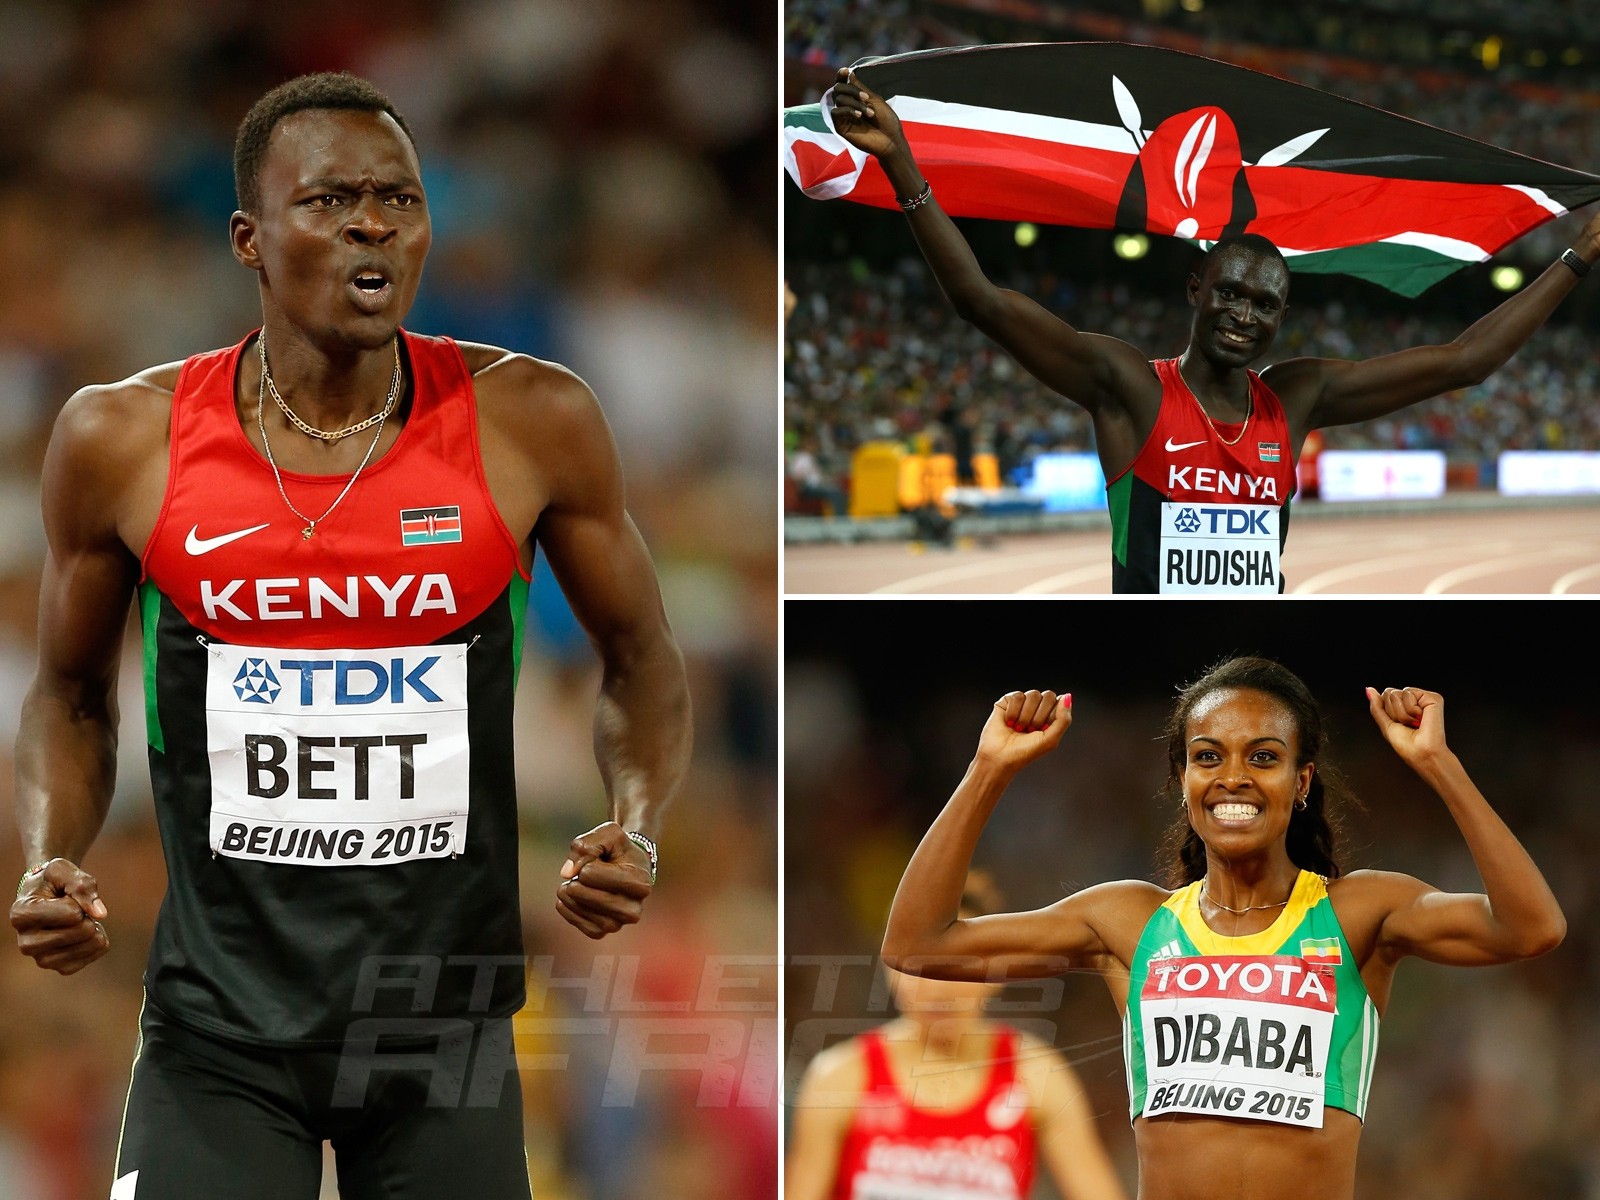 African winners on Day 4 at the 2015 IAAF World Championships in Beijing, China / Photo credit: Getty Images for the IAAF